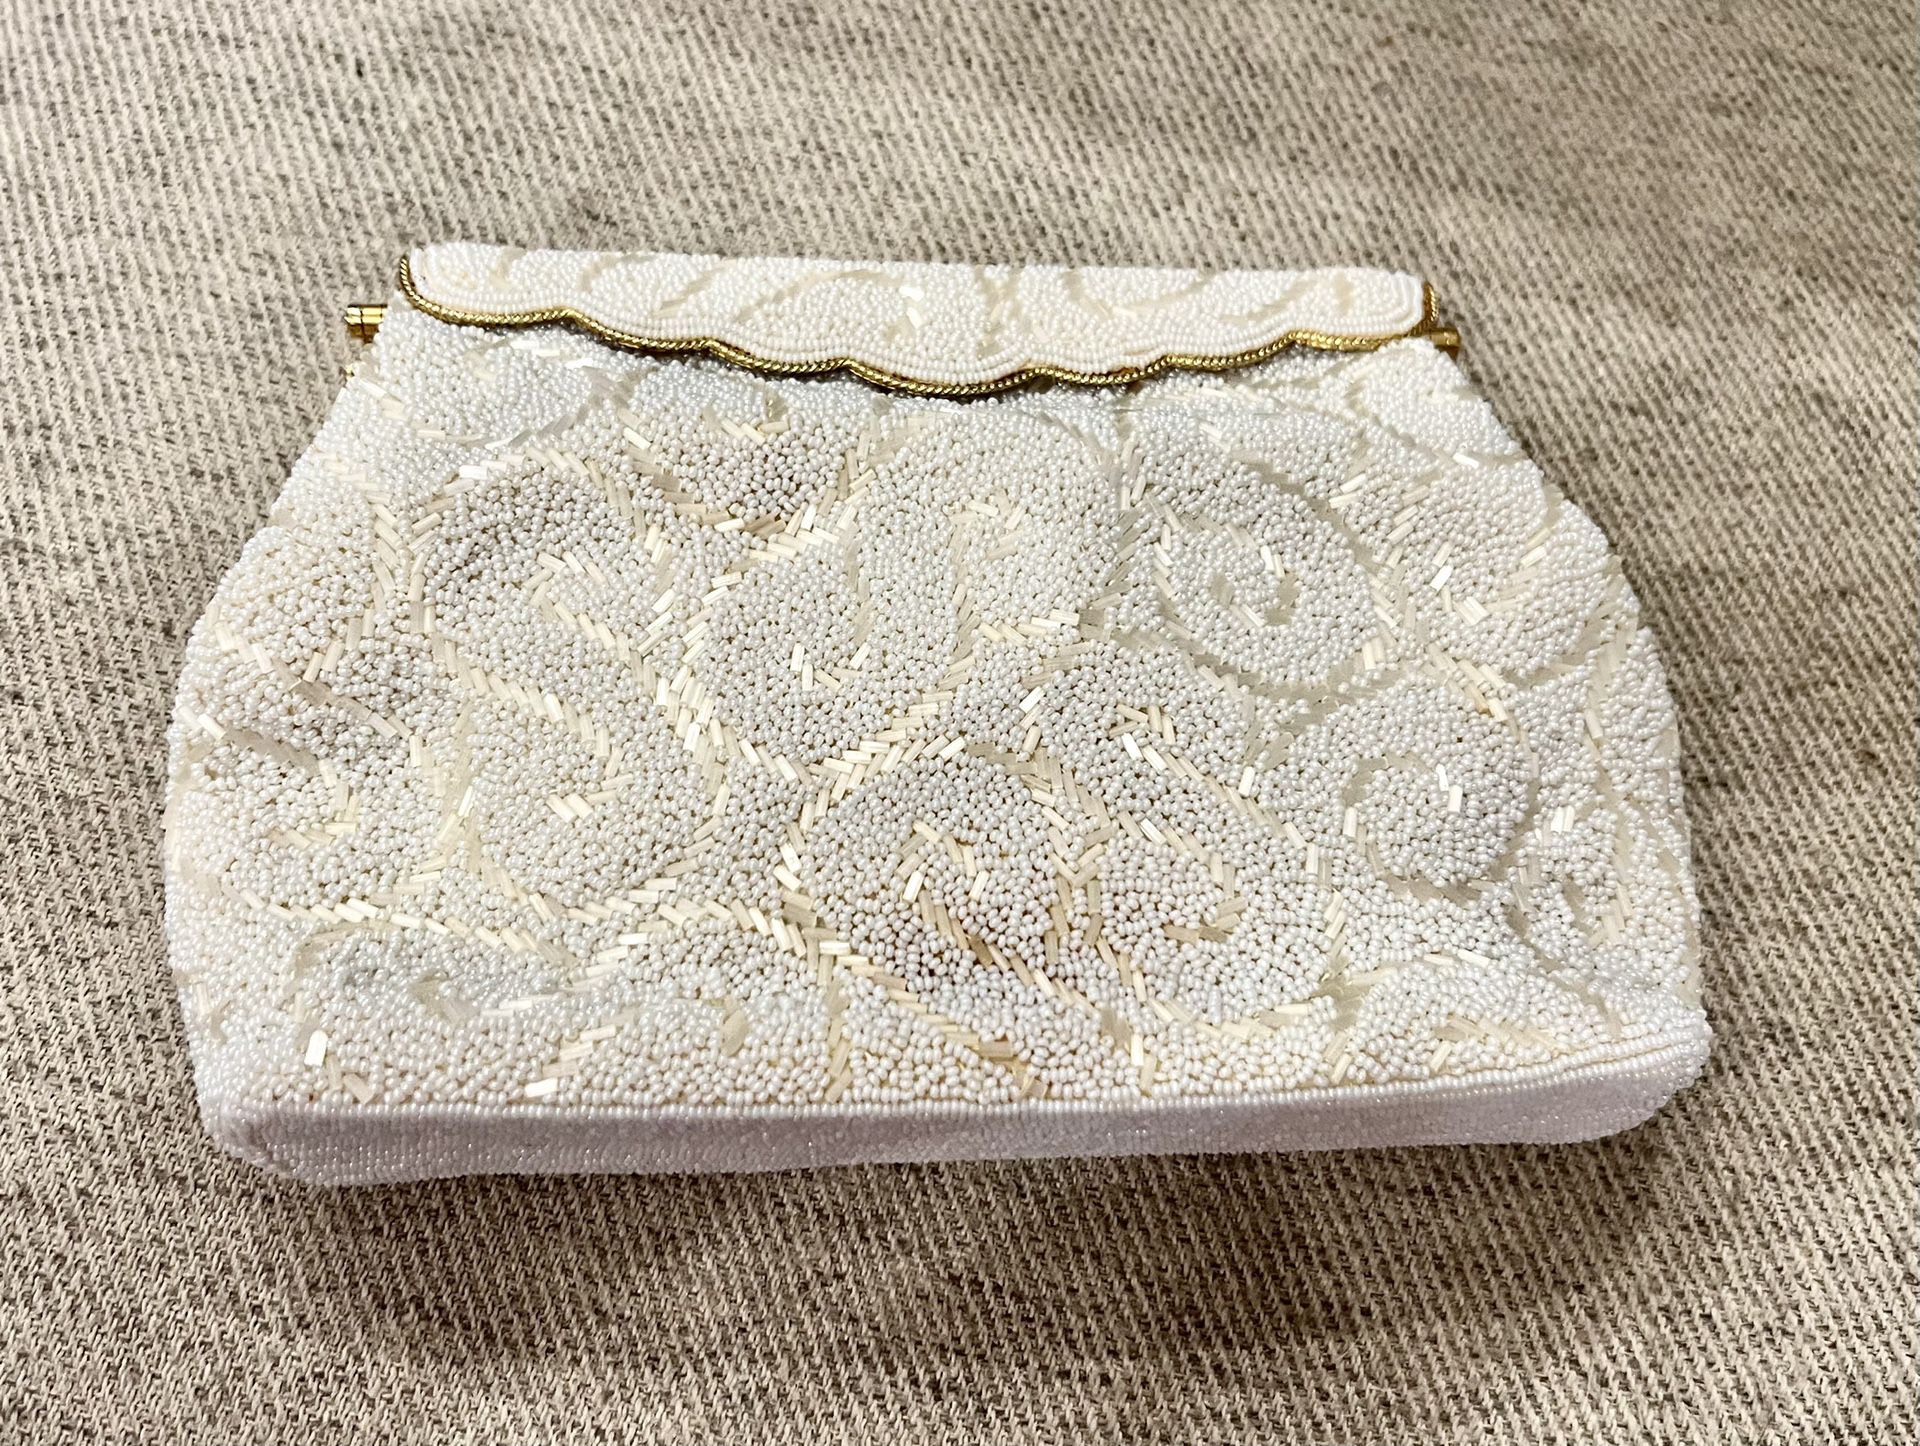 Moving! Reduced!  Vintage  Micro-Beaded Purse for Dressy Evening or  Daytime Events